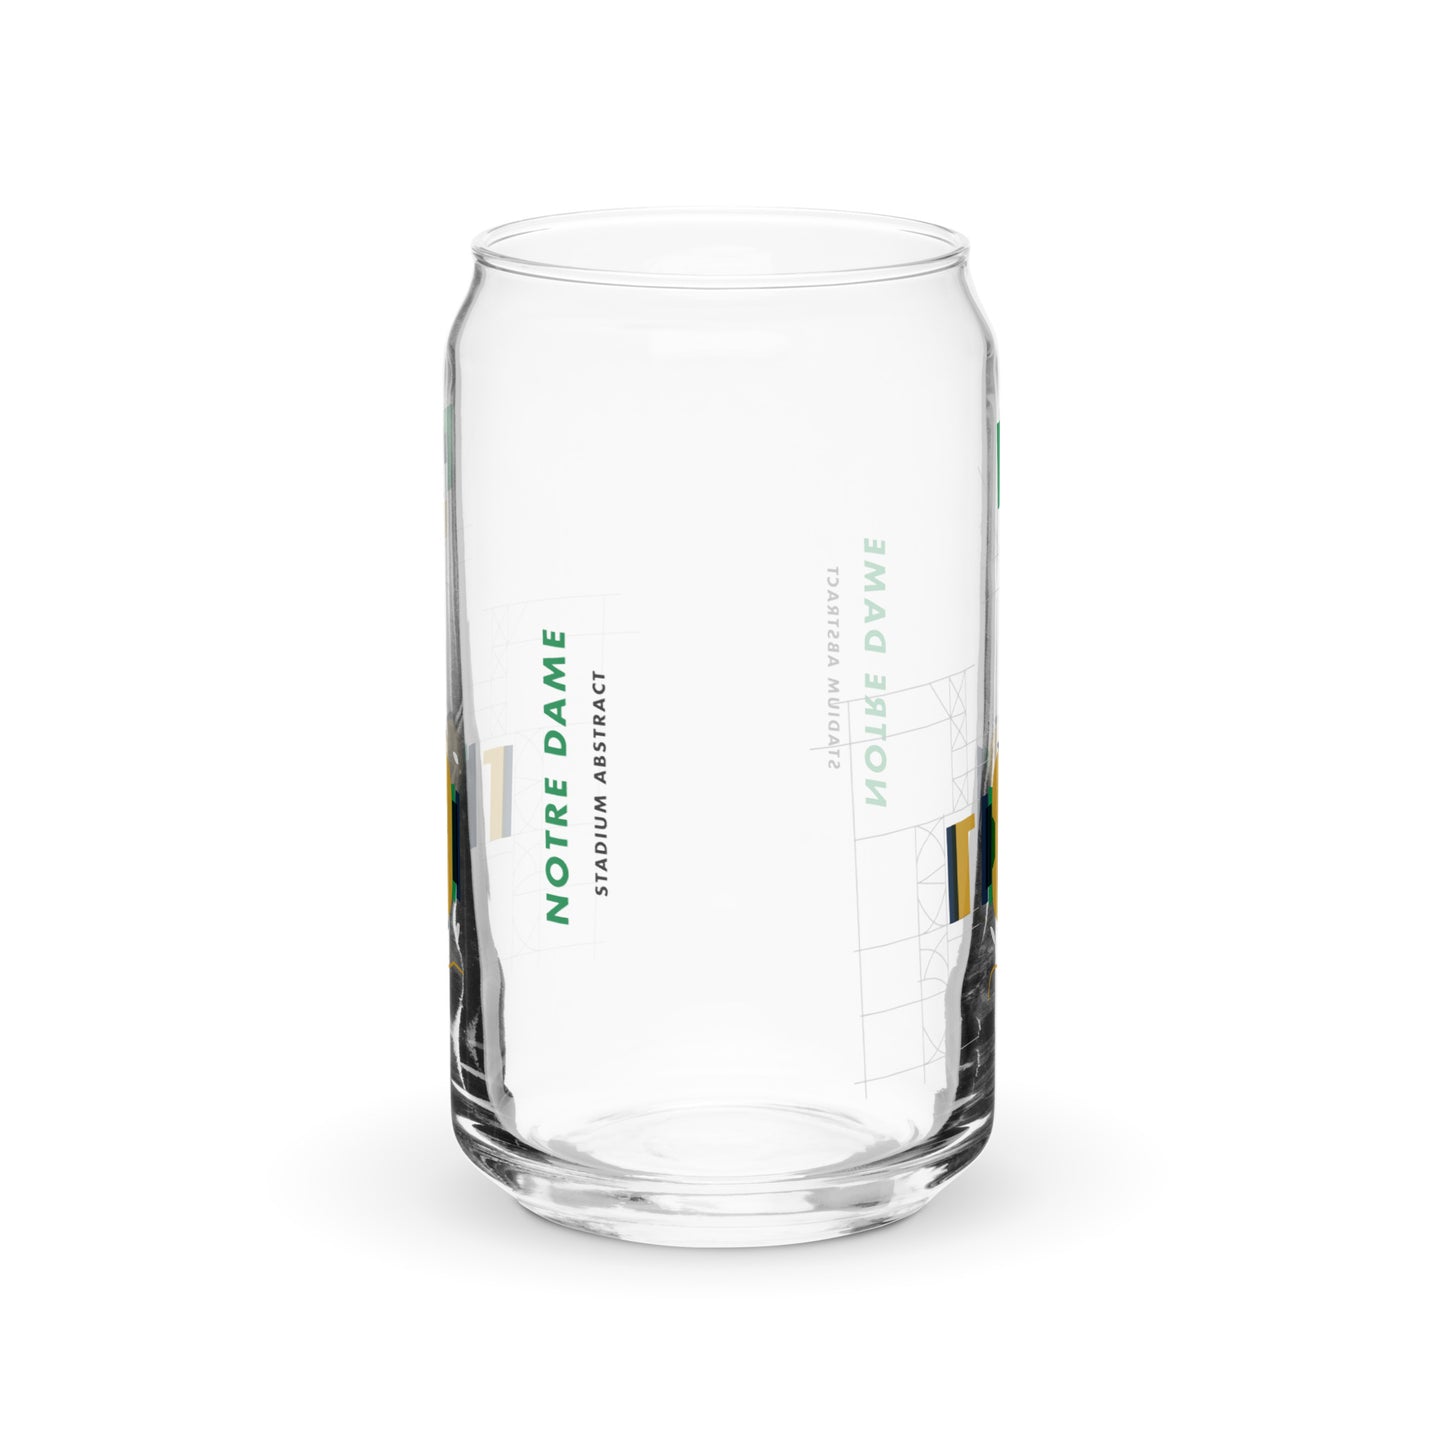 Notre Dame Fighting Irish | Can-shaped glass